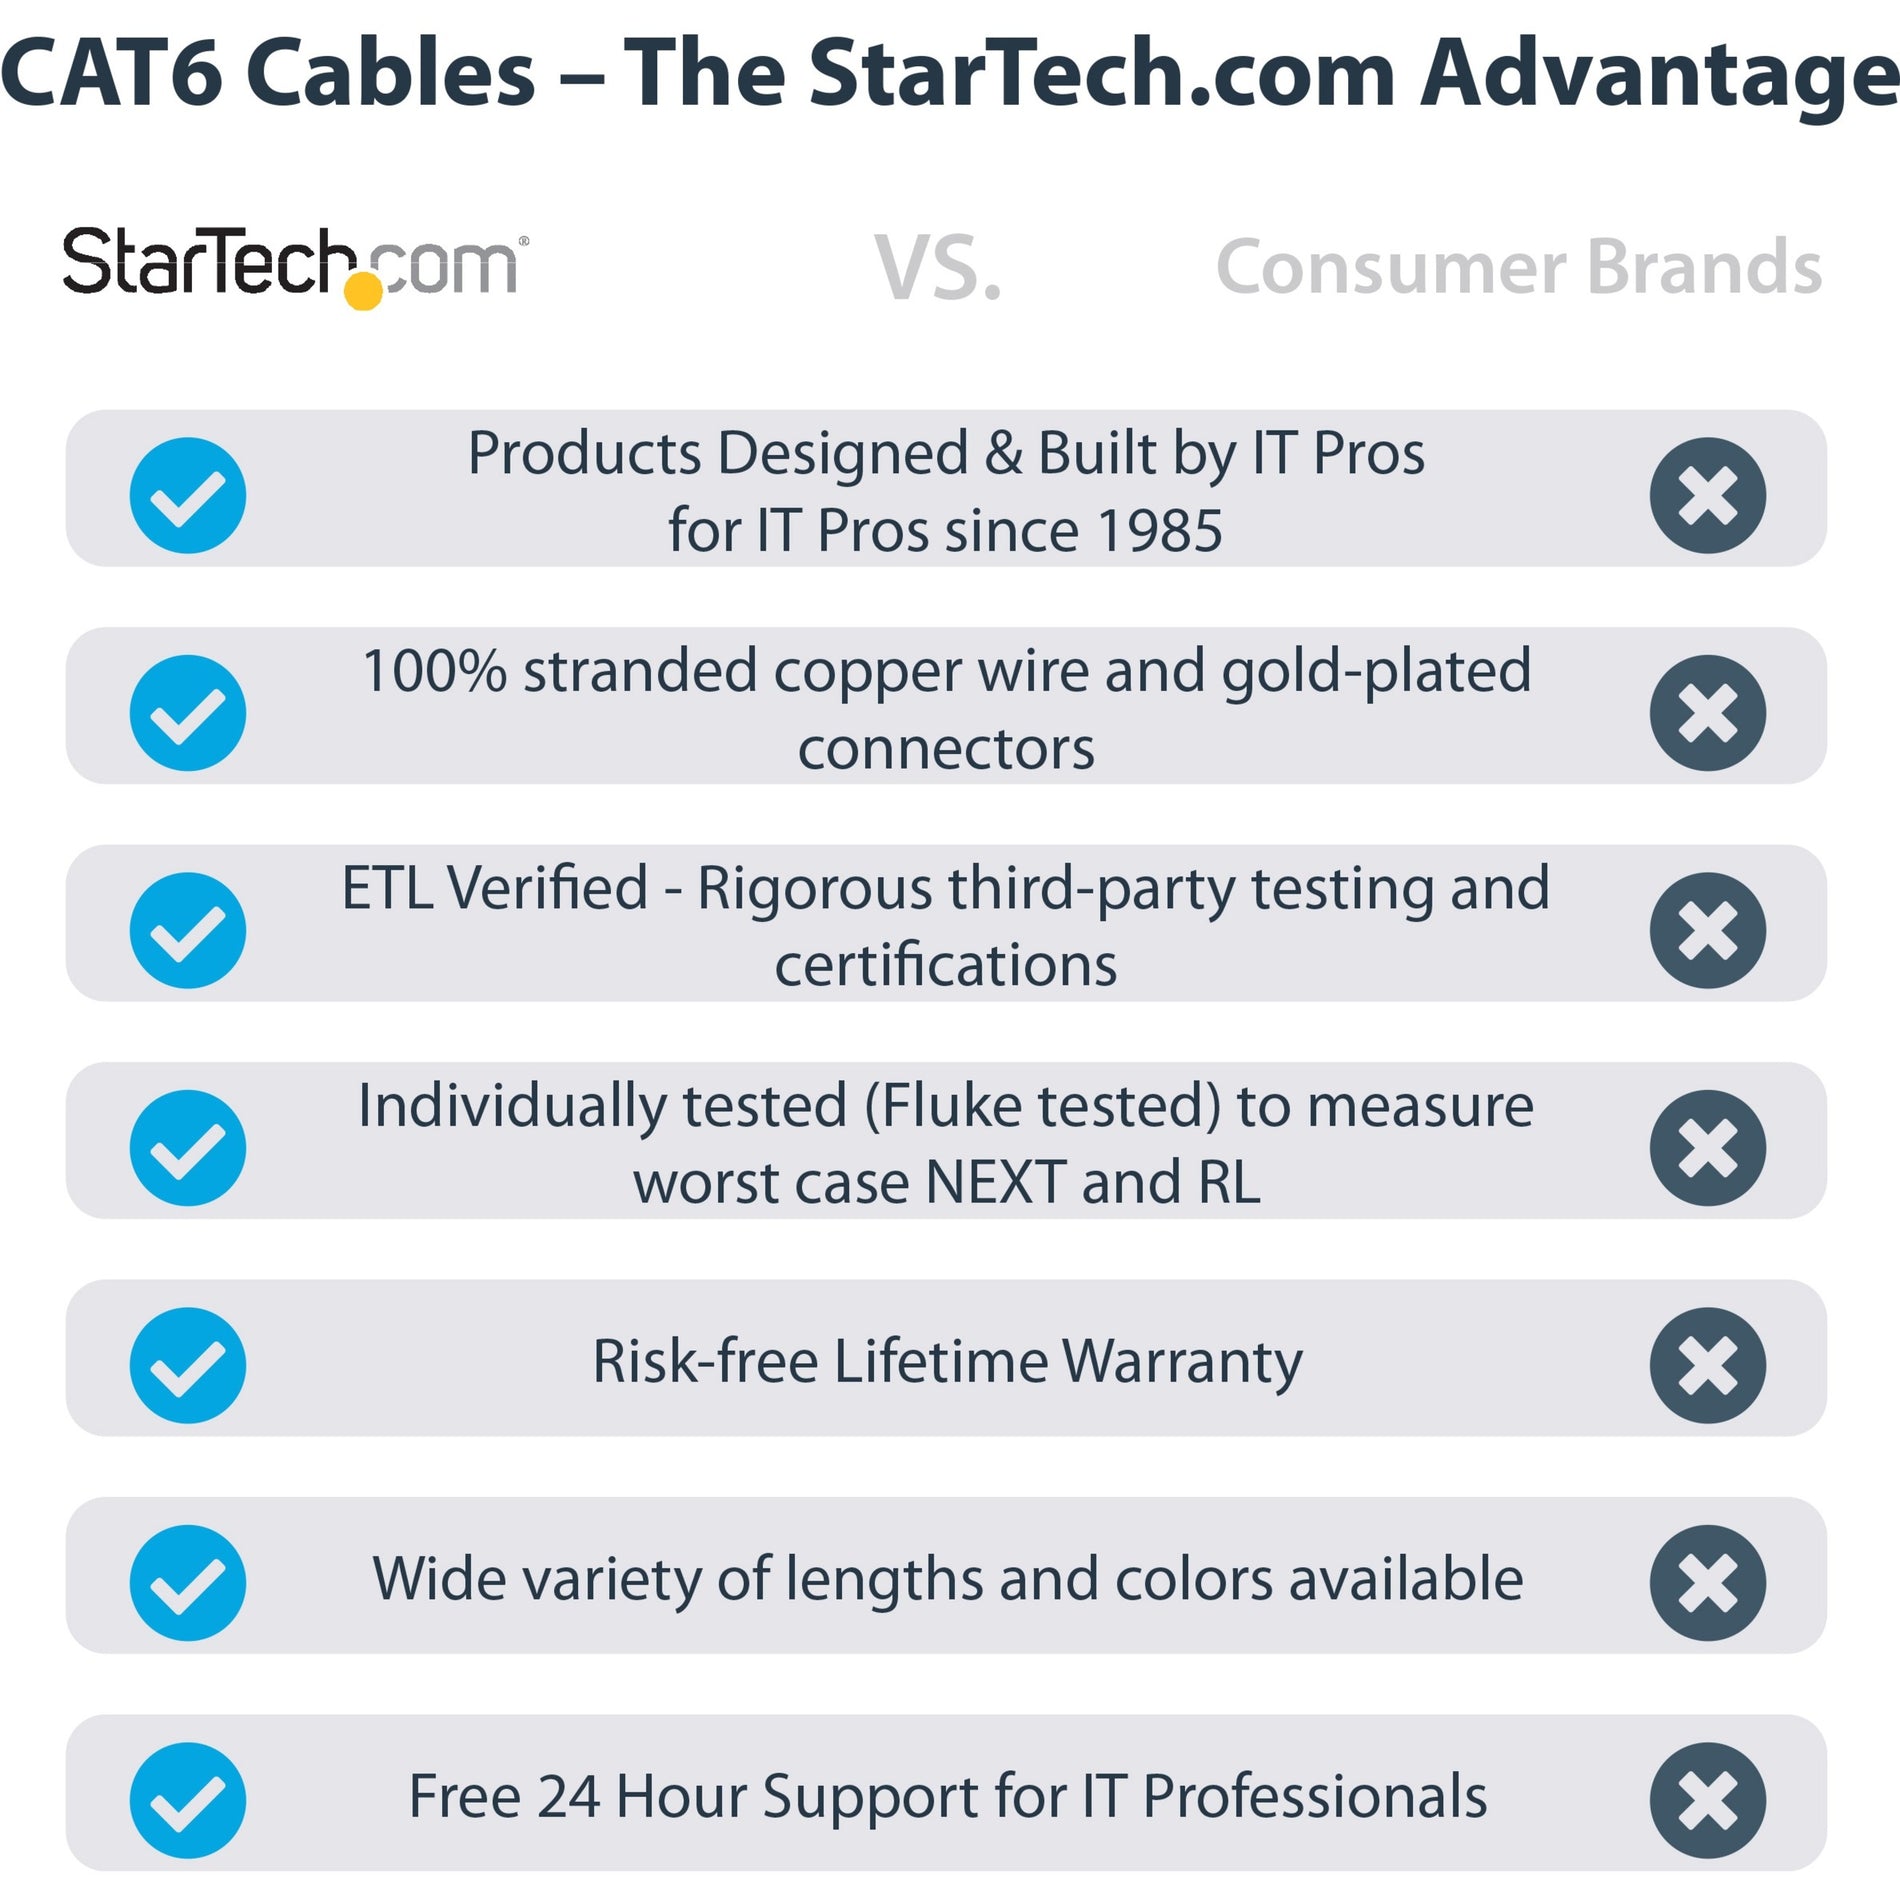 StarTech.com N6PATCH1BL Cat6 Patch Cable, 1 ft, 10 Gbit/s Data Transfer Rate, Blue